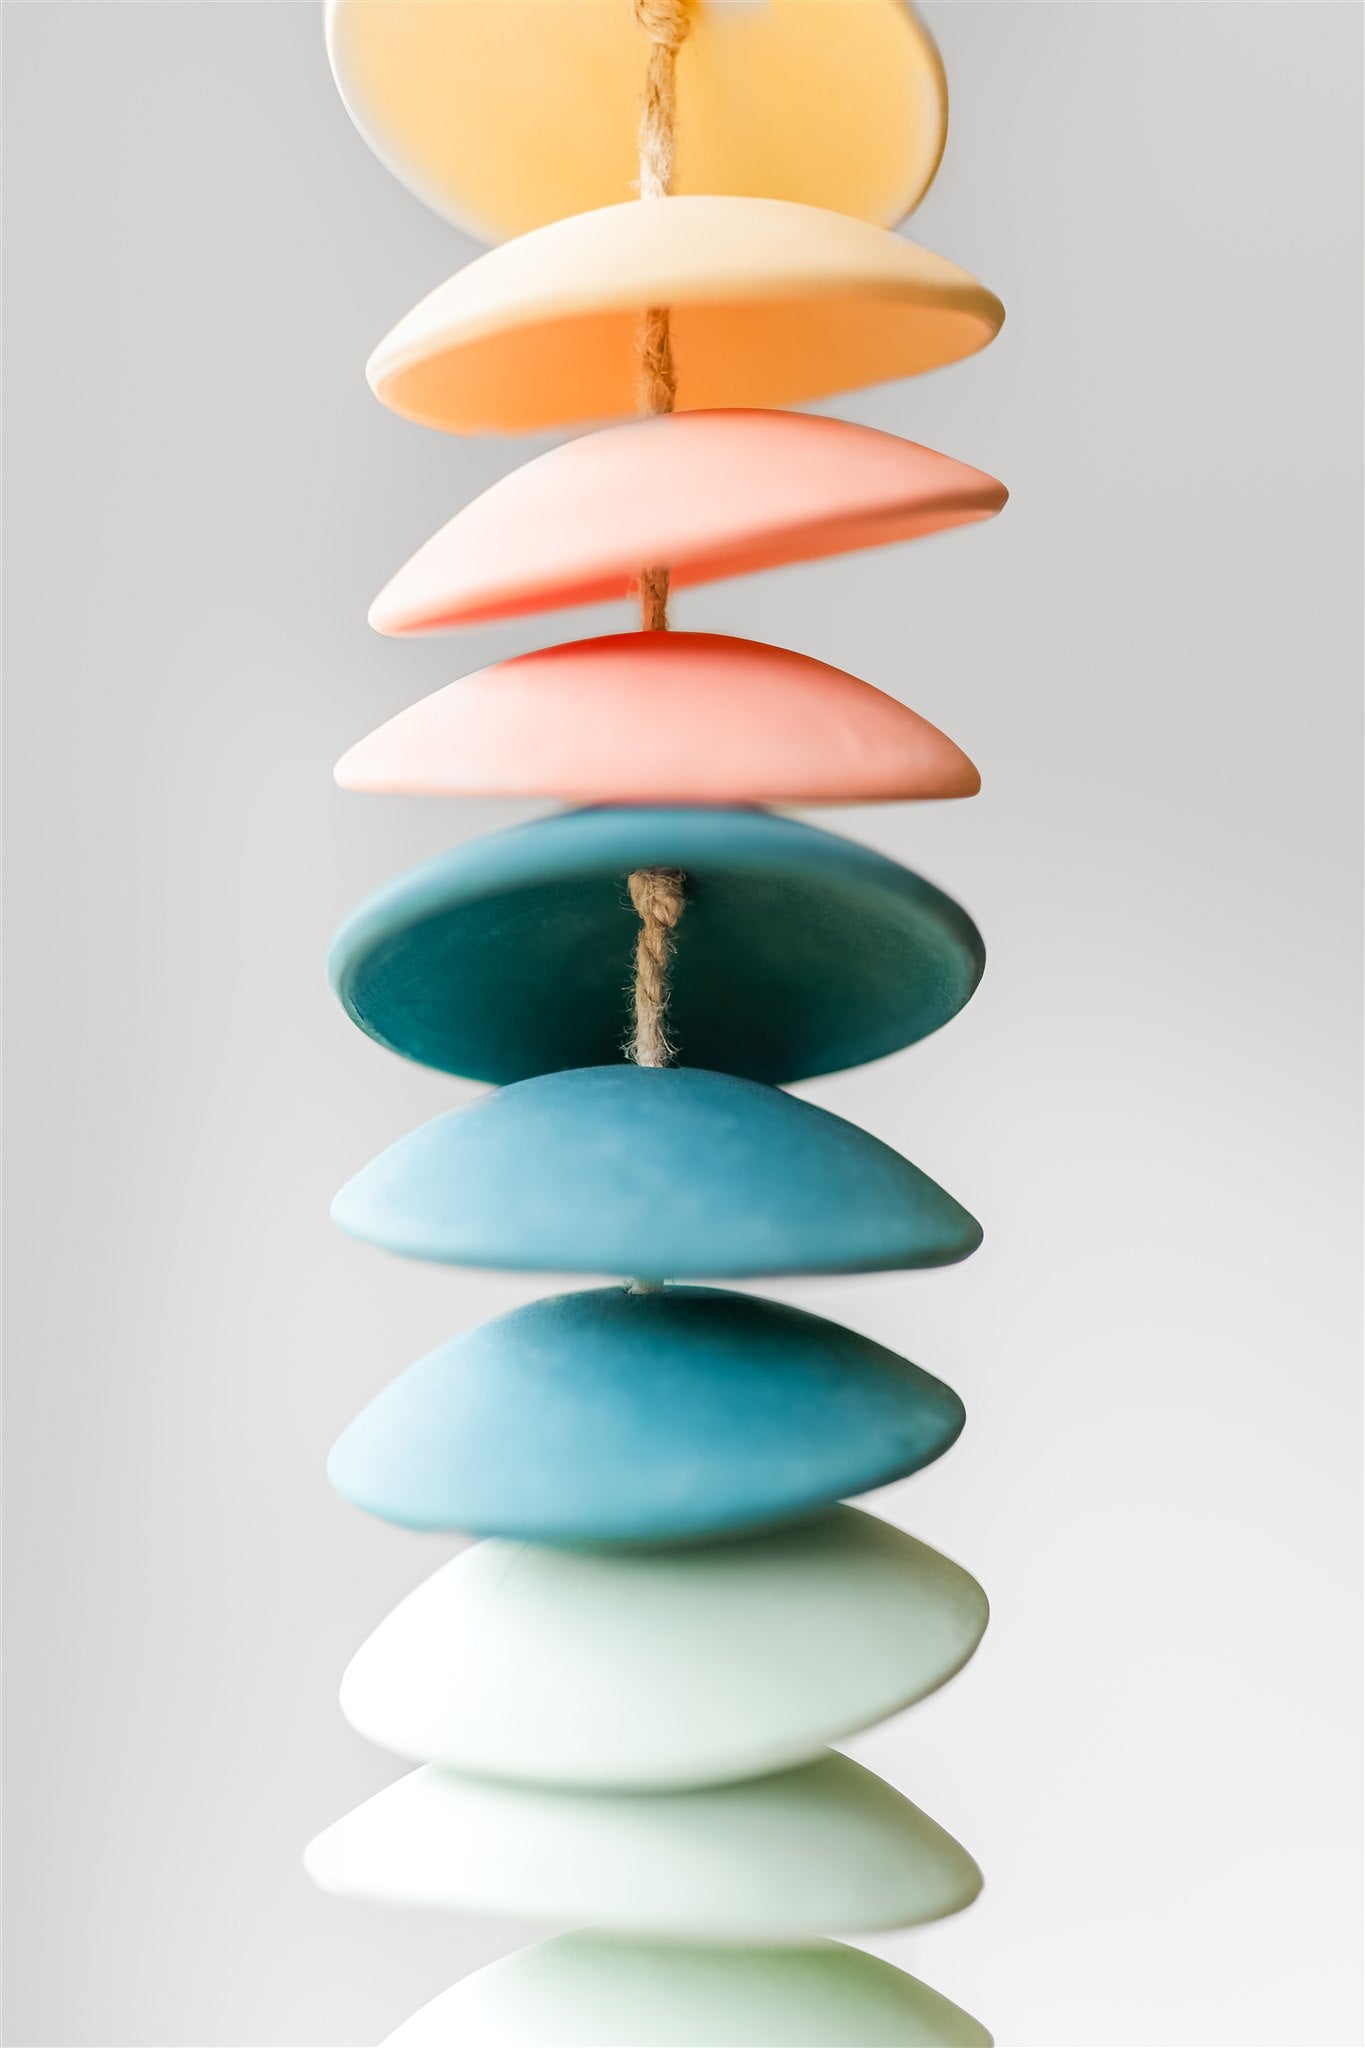 Ceramic chimes in light yellow, coral, teal, seafoam